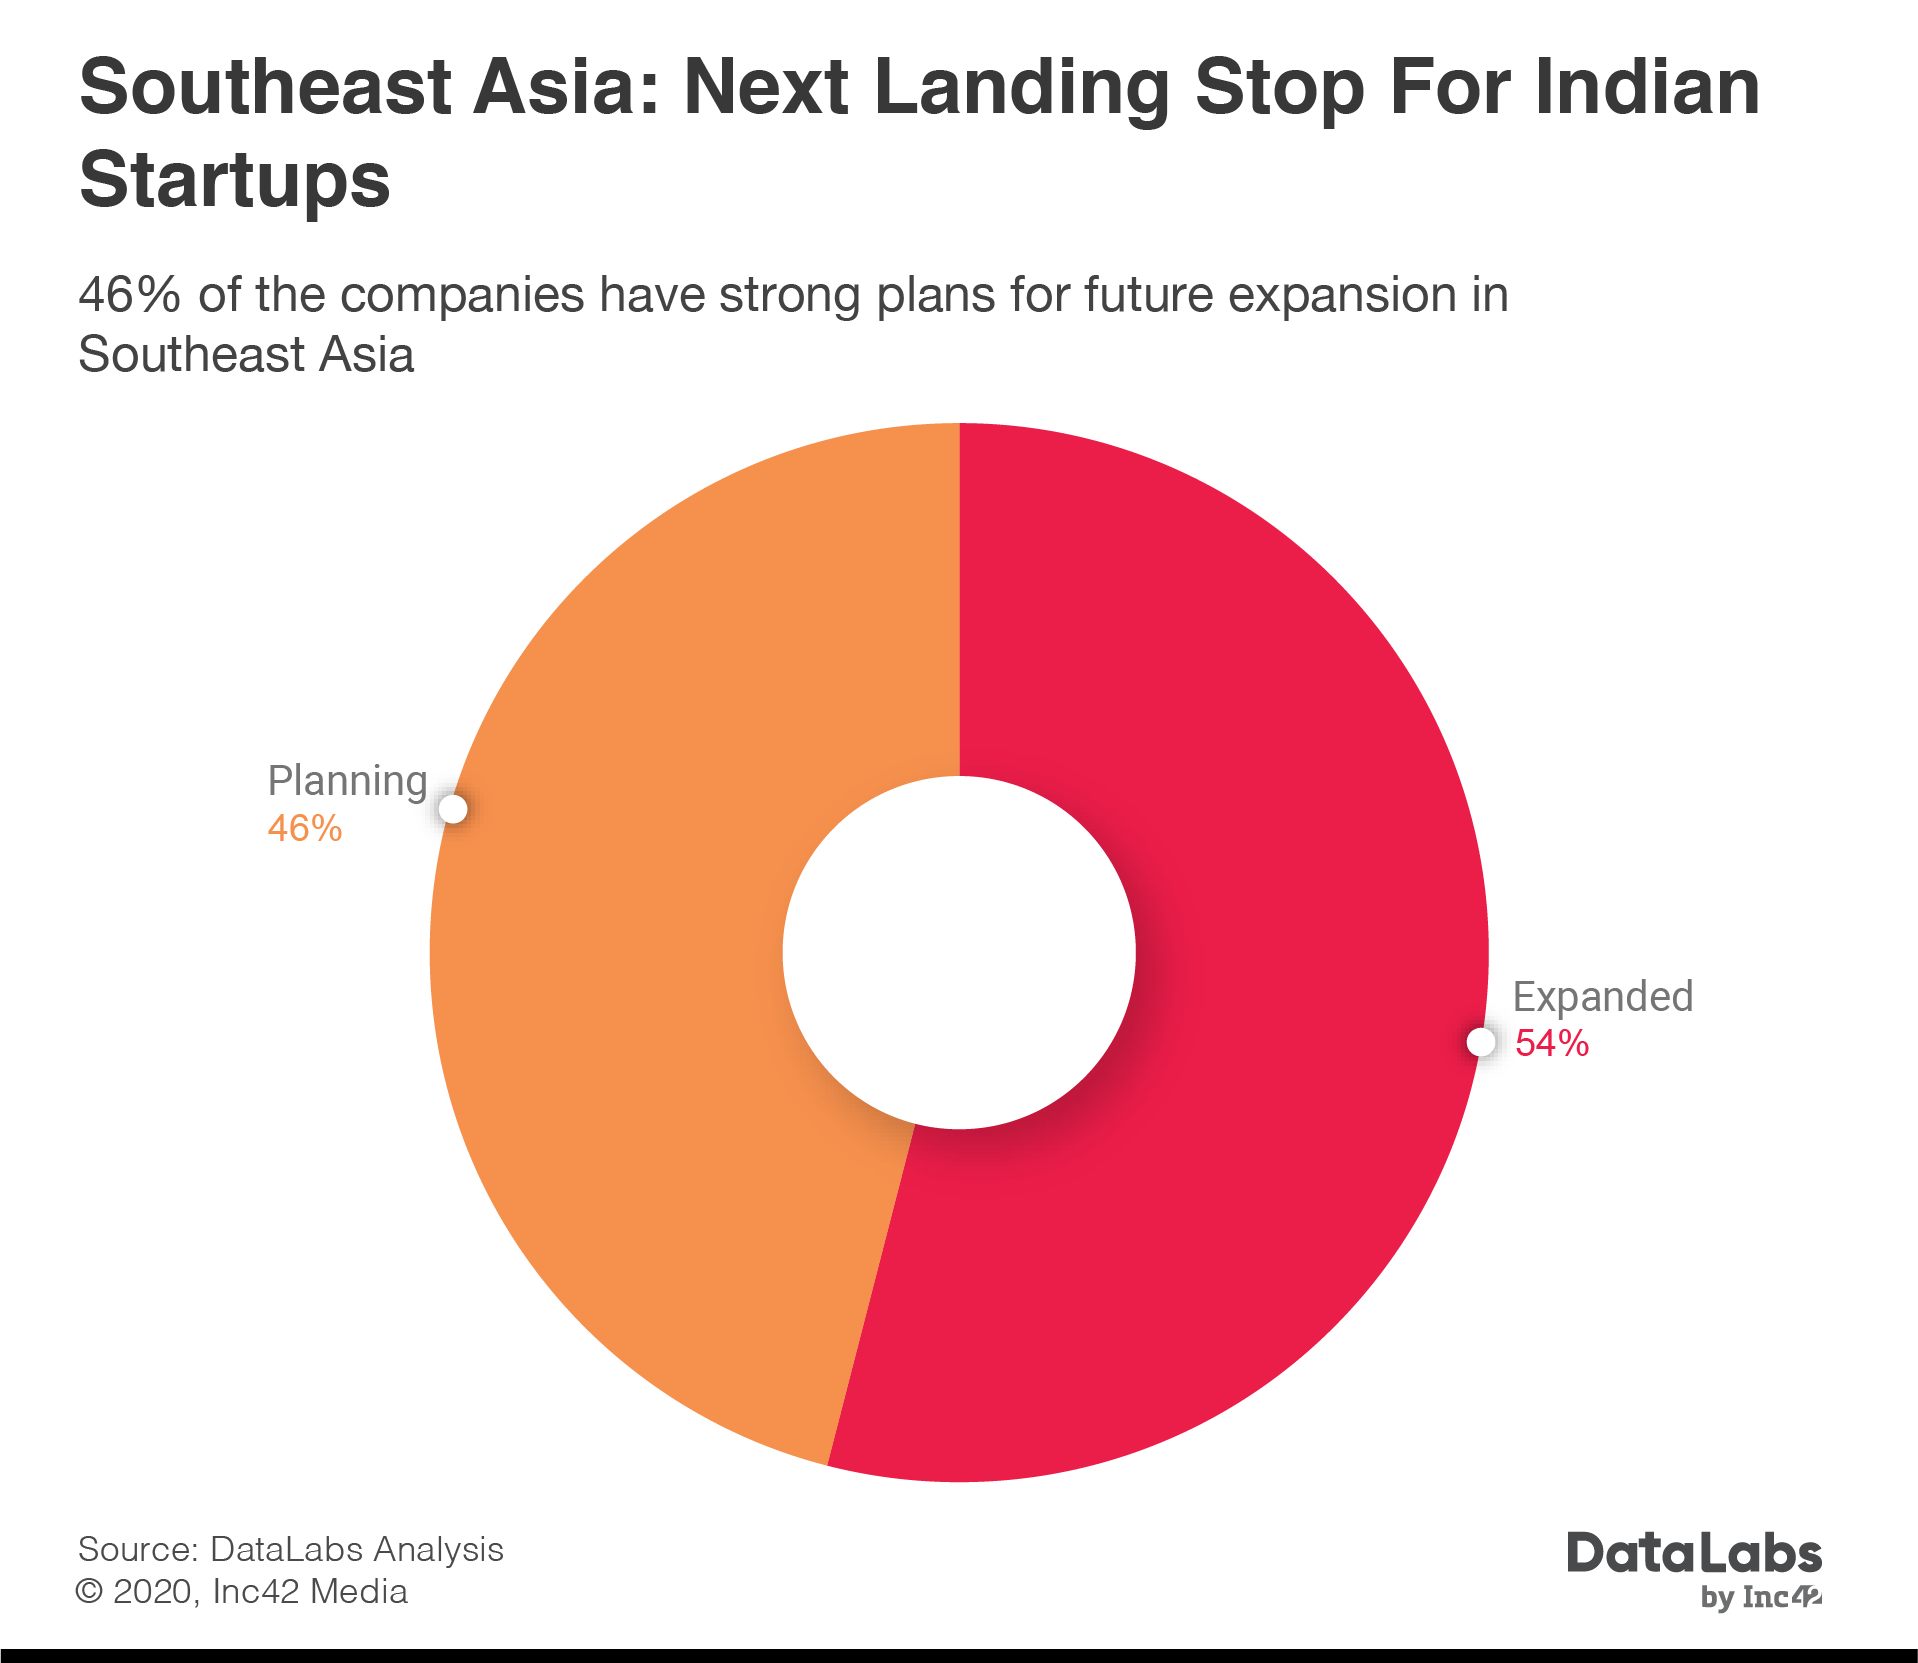 Indian startups interested in southeast asia